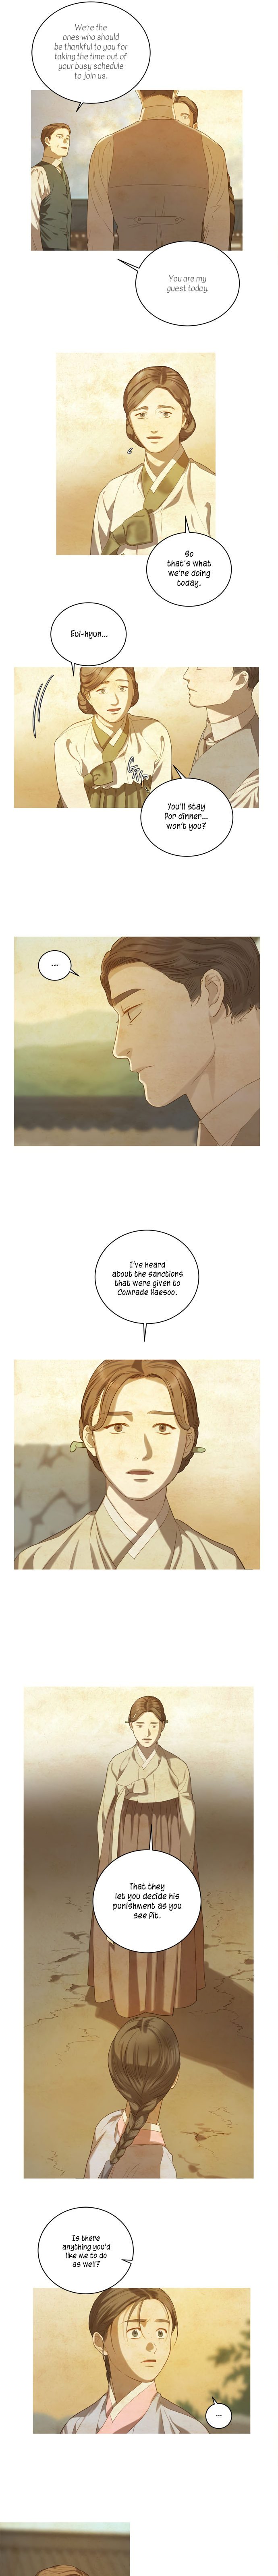 The Whale Star - The Gyeongseong Mermaid - Chapter 34 Page 4